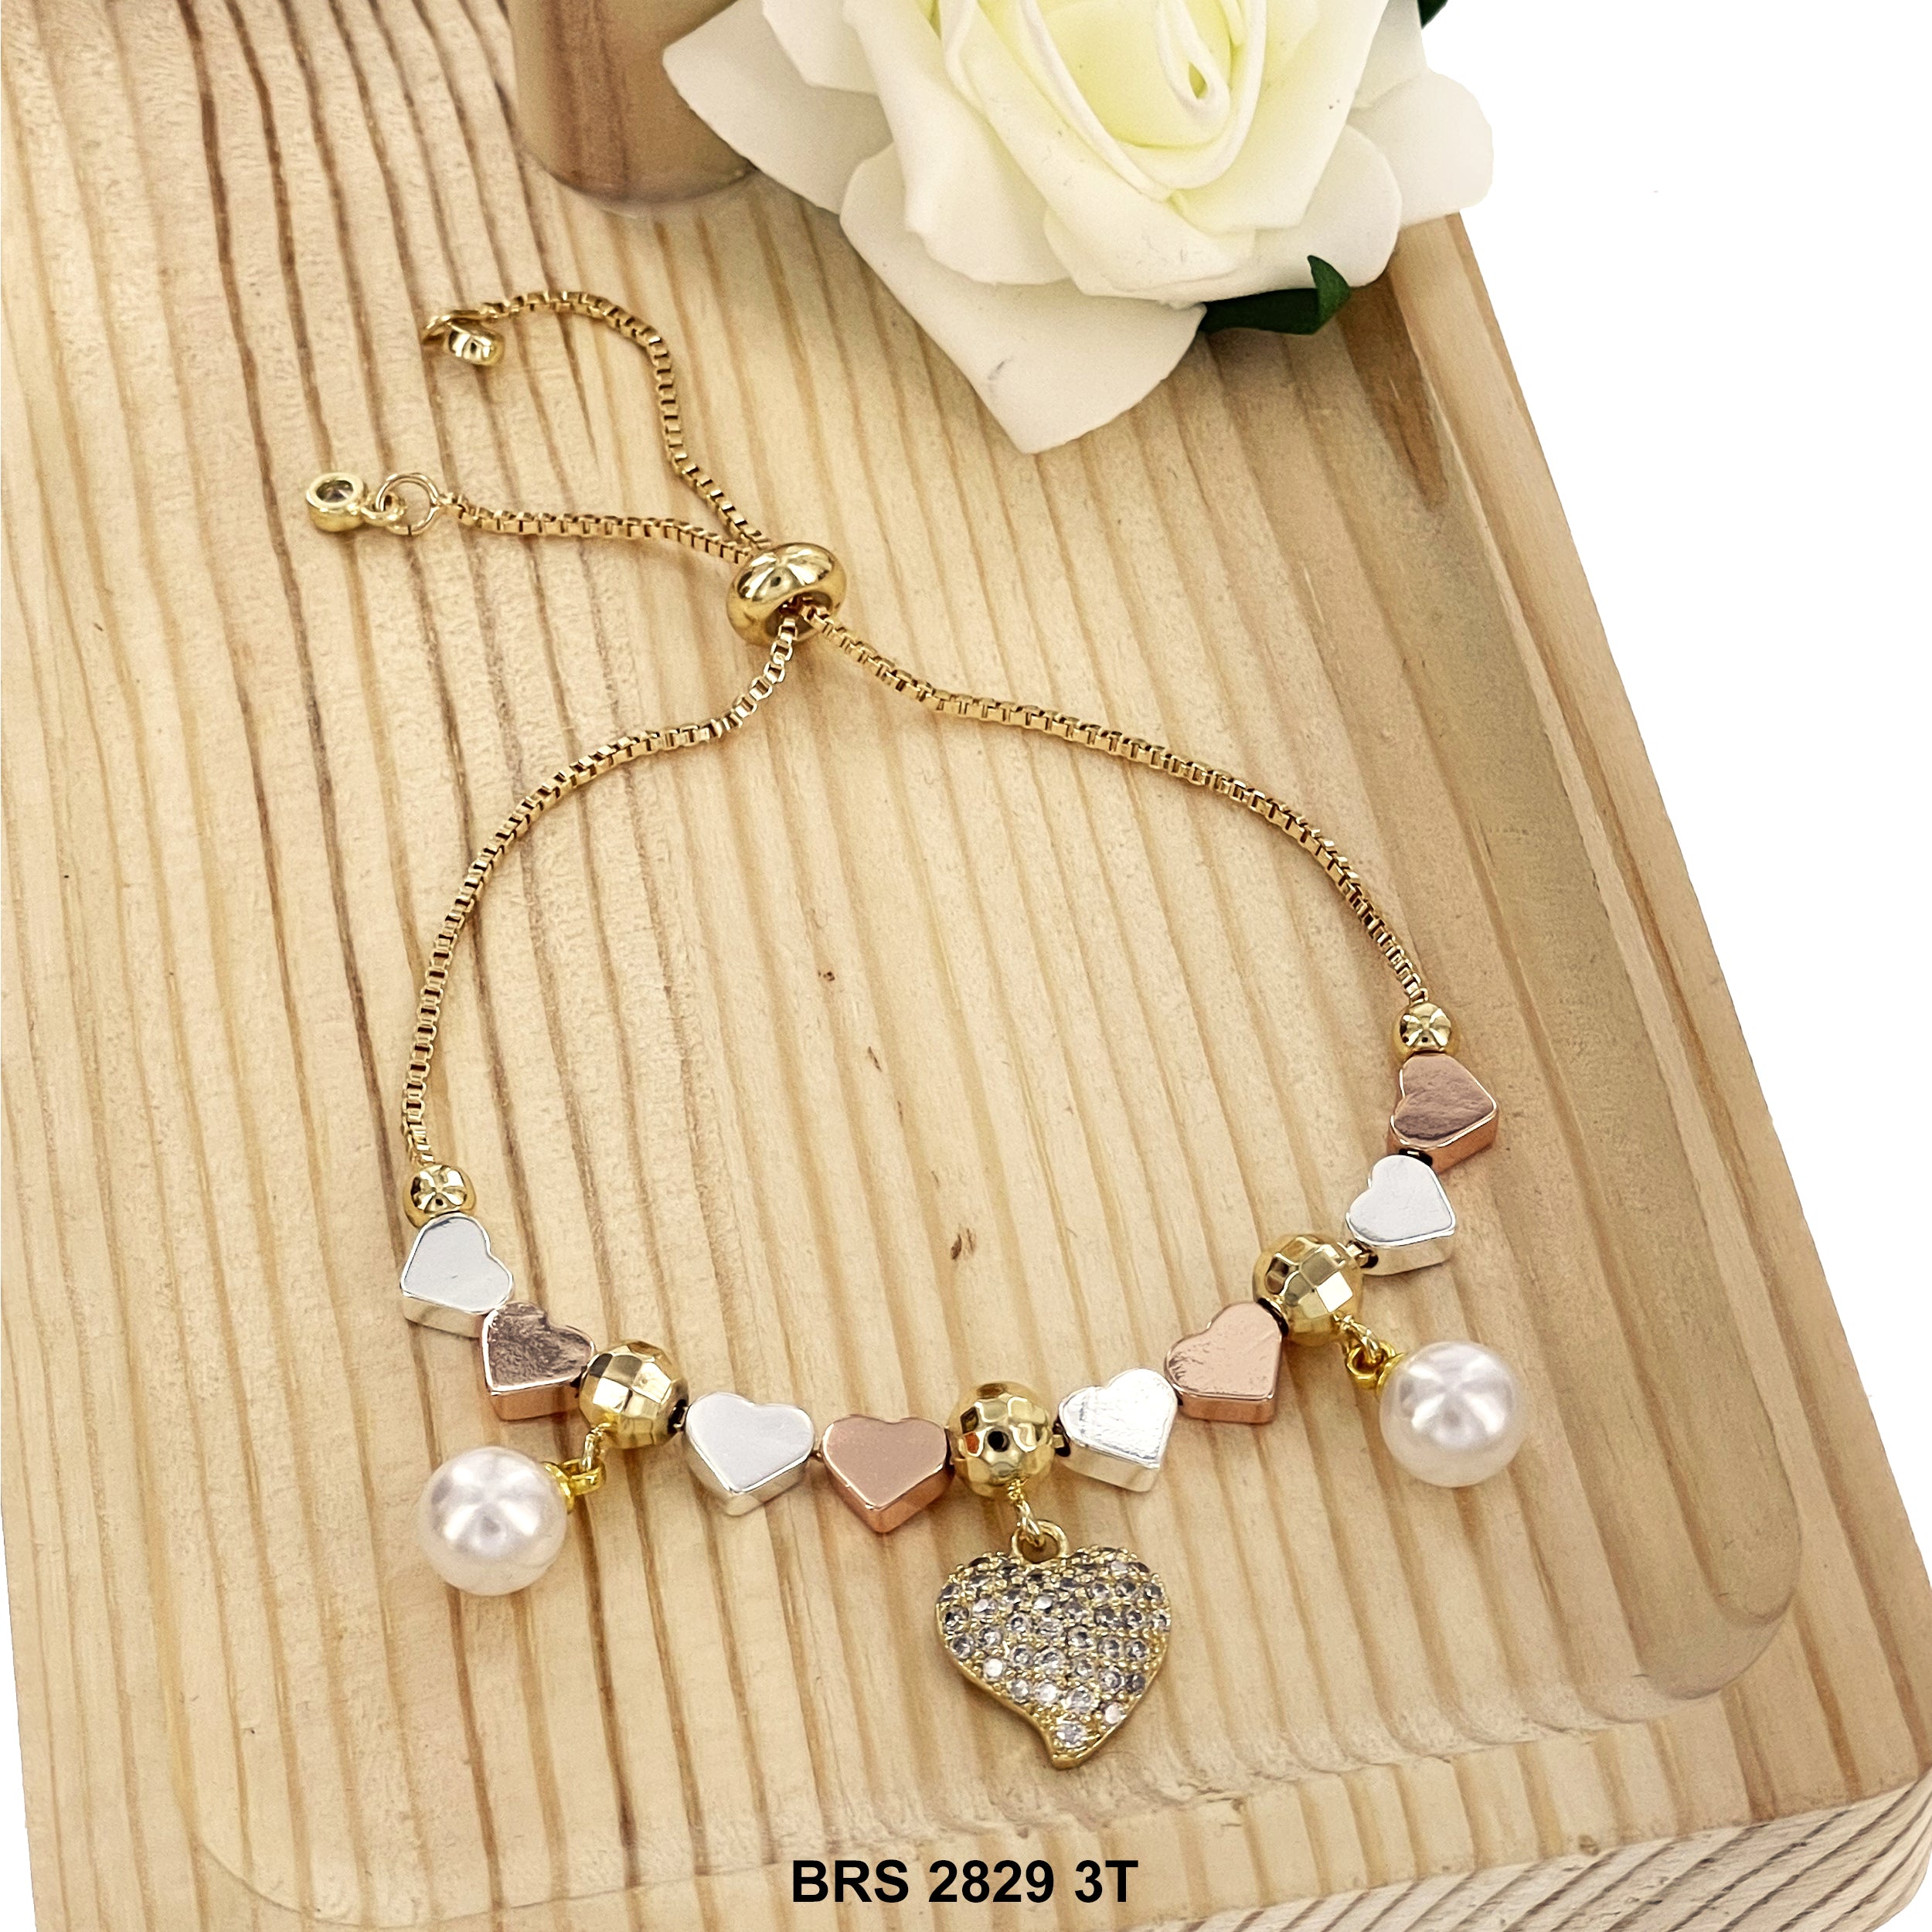 Heart Pearl Charms Heart Beads Adjustable Bracelet BRS 2829 3T